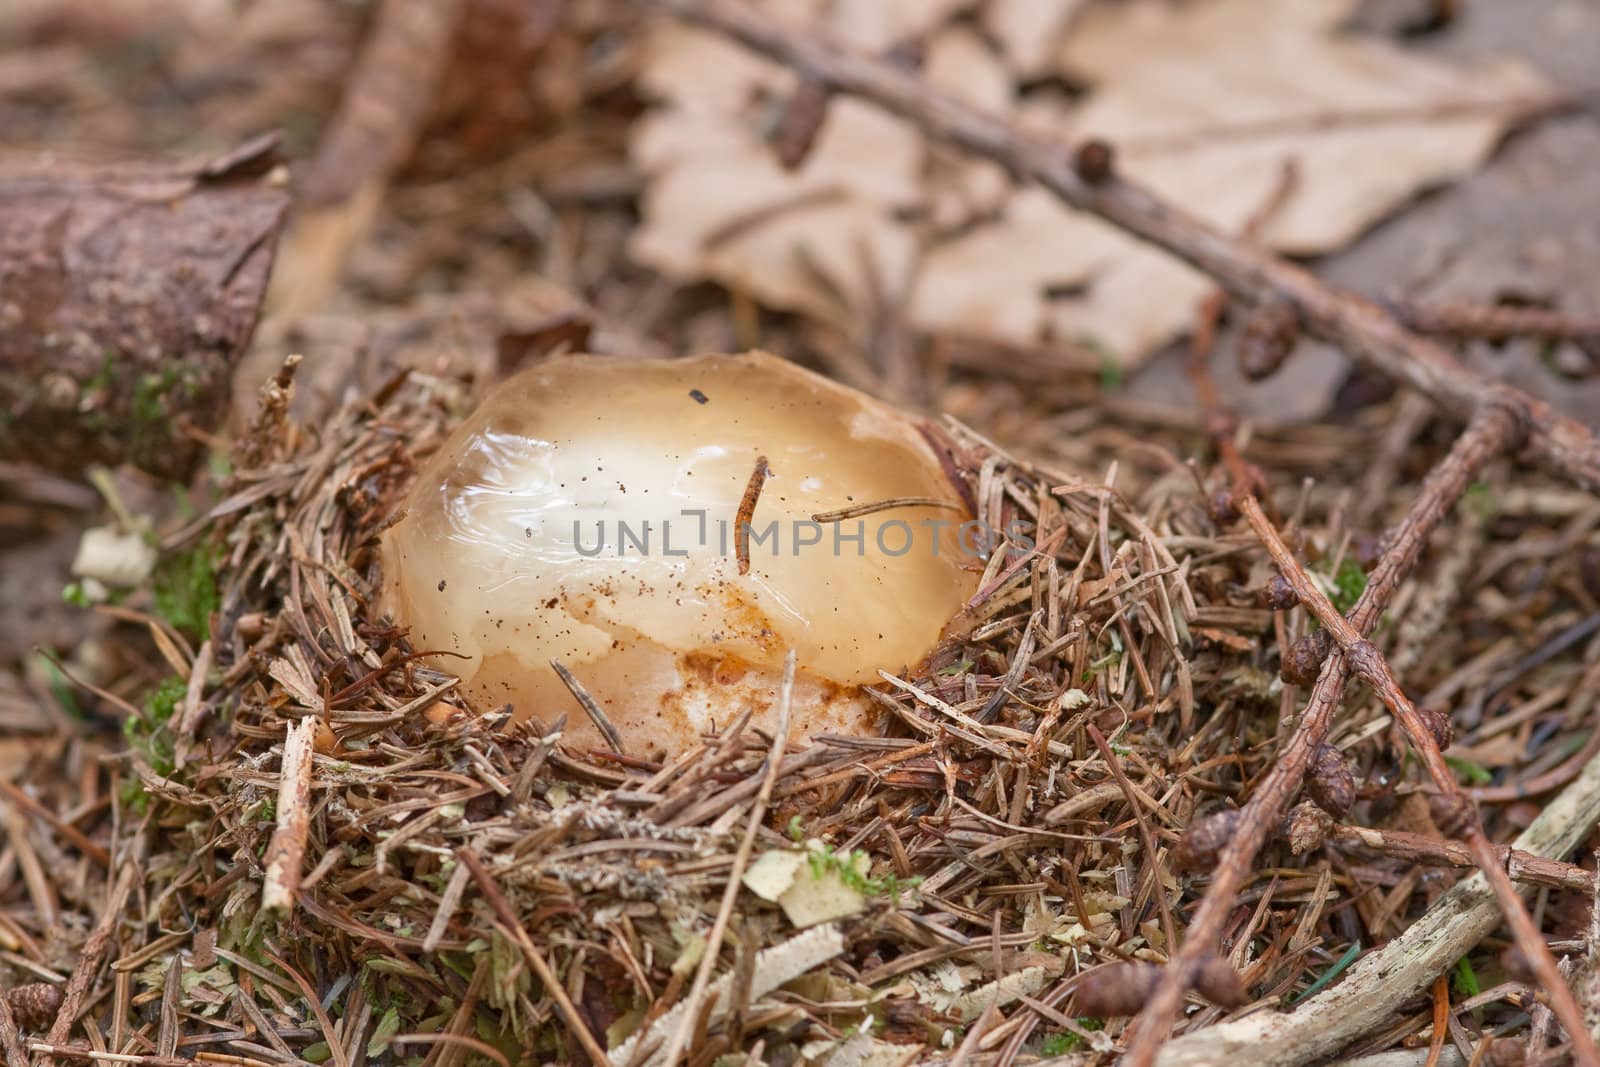 Witches egg, Phallus impudicus, embryo stage in nest of pine needles.